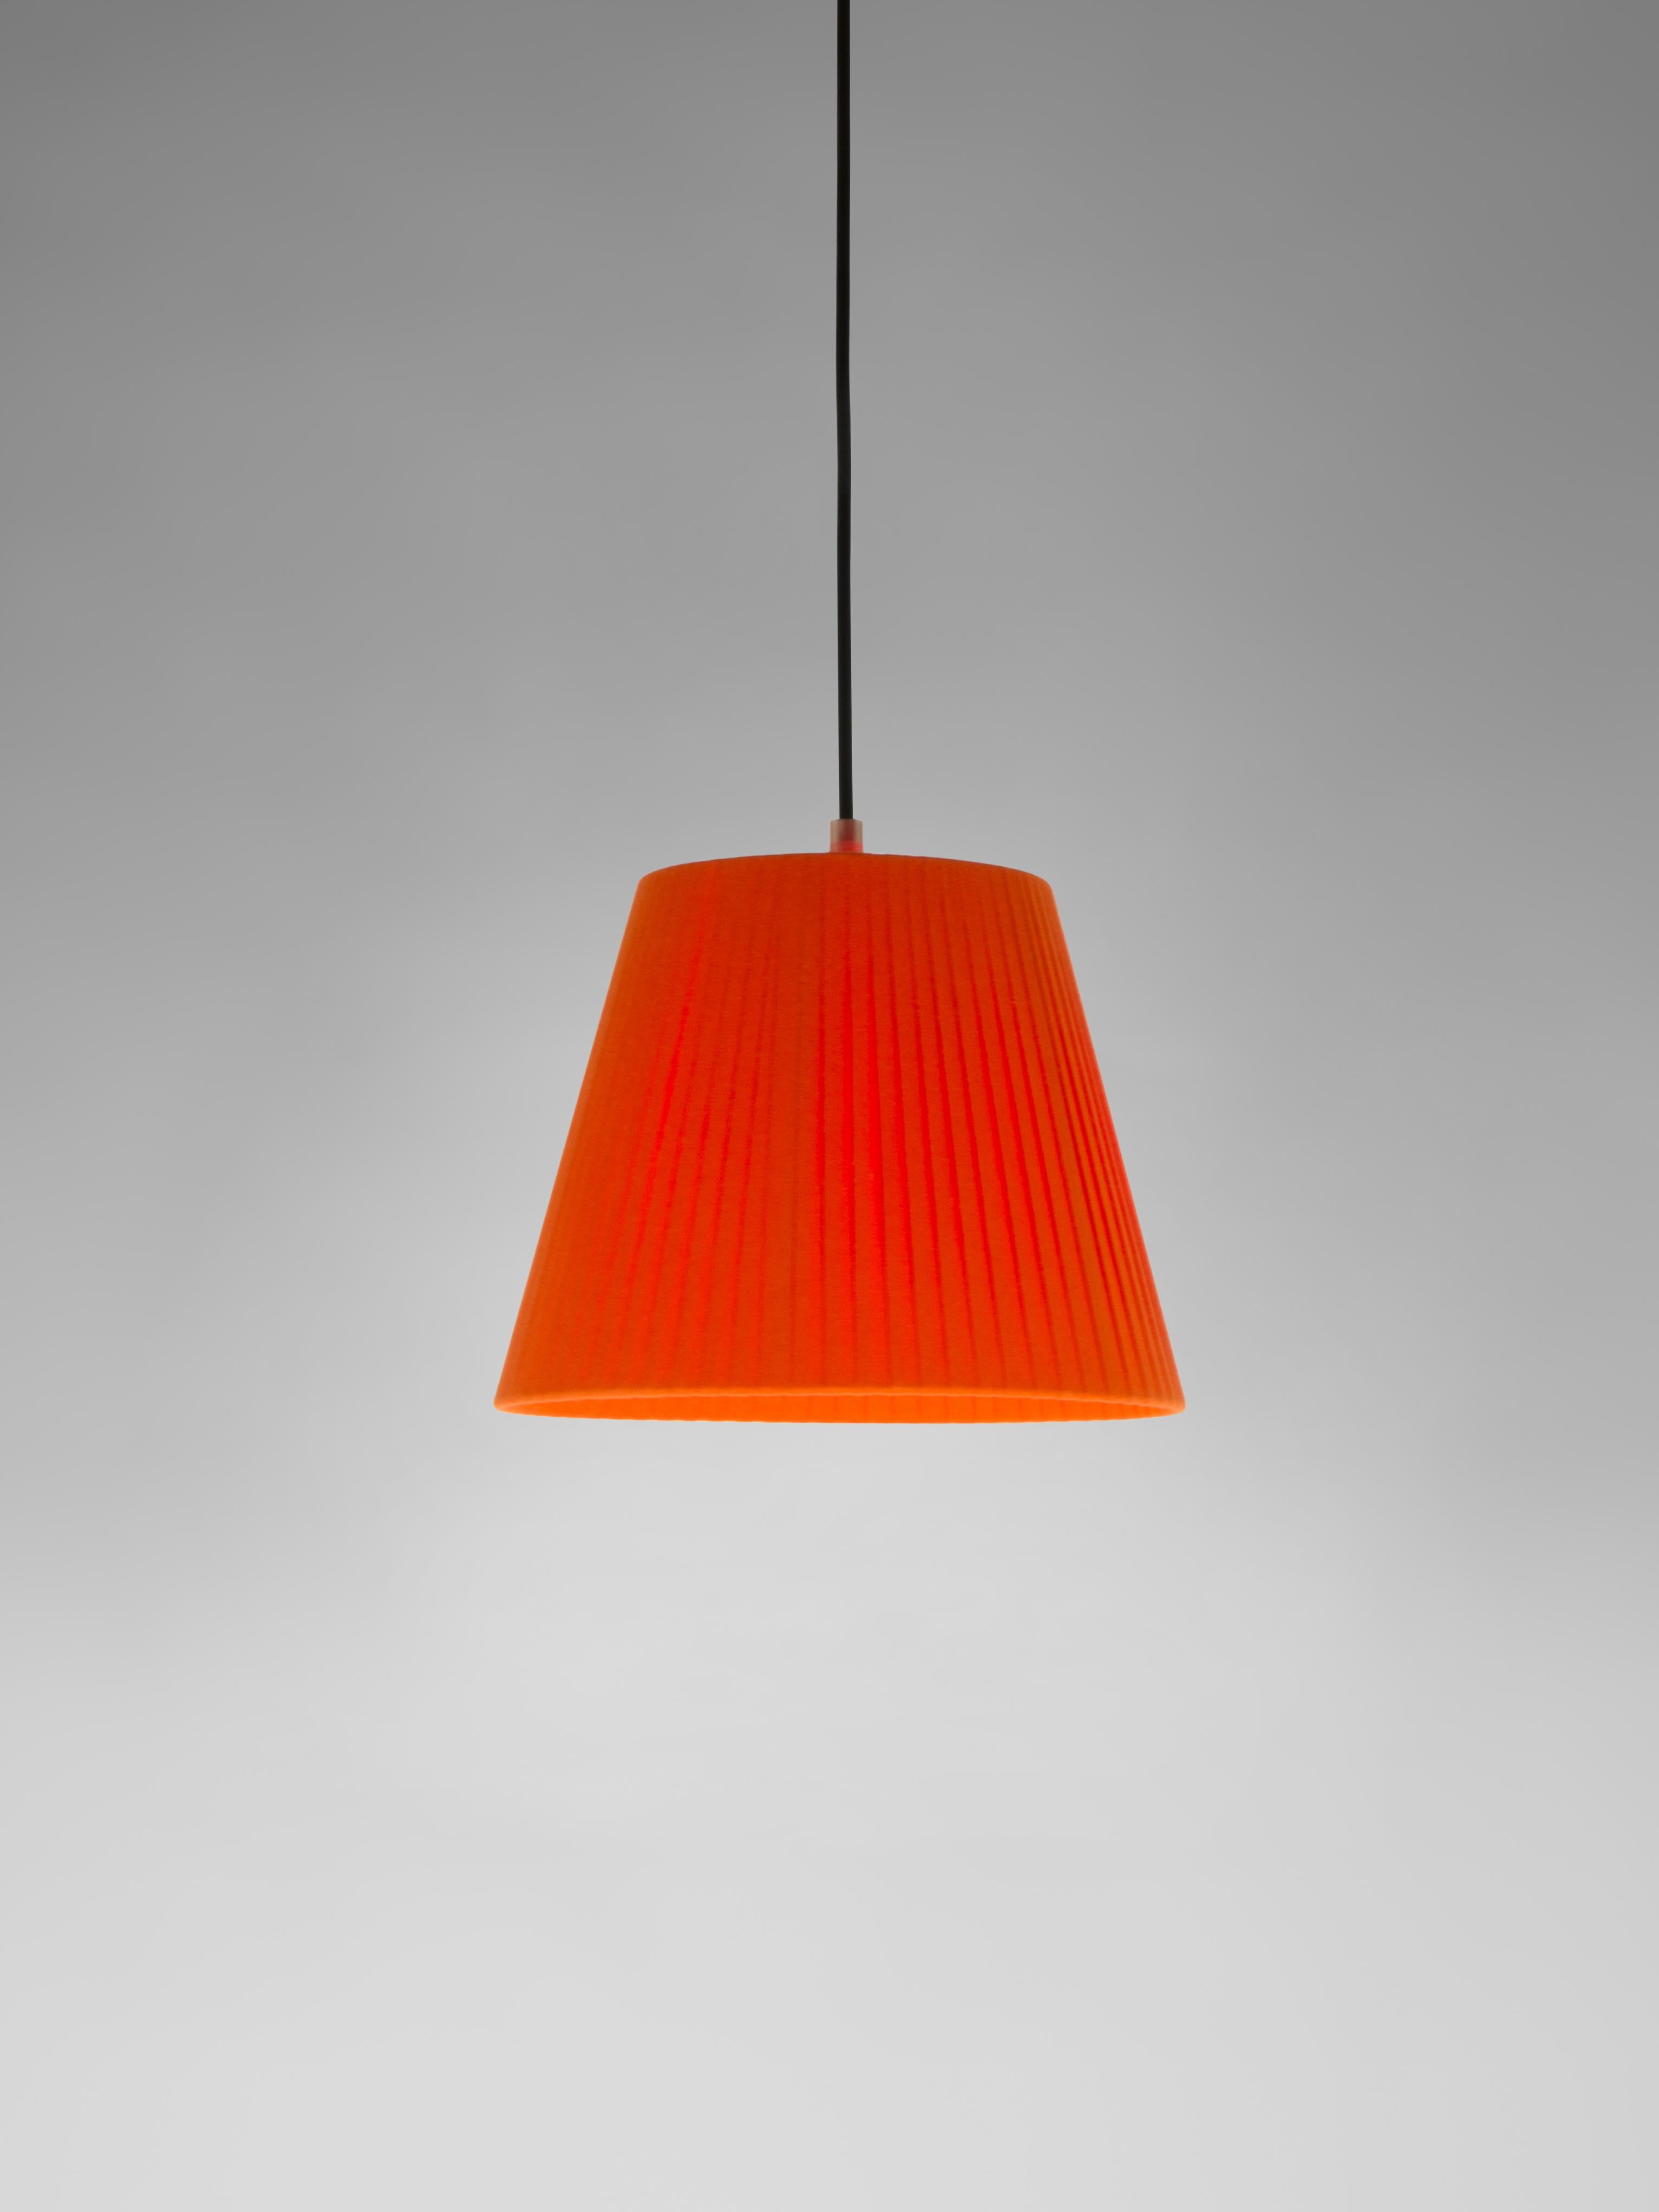 Red Sísísí Cónicas MT1 pendant lamp by Santa & Cole
Dimensions: D 25 x H 20 cm
Materials: Metal, ribbon.
Available in other colors.

The conical shape group has multiple finishes and sizes. It consists of four sizes: PT1, MT1, GT1 and GT3, and